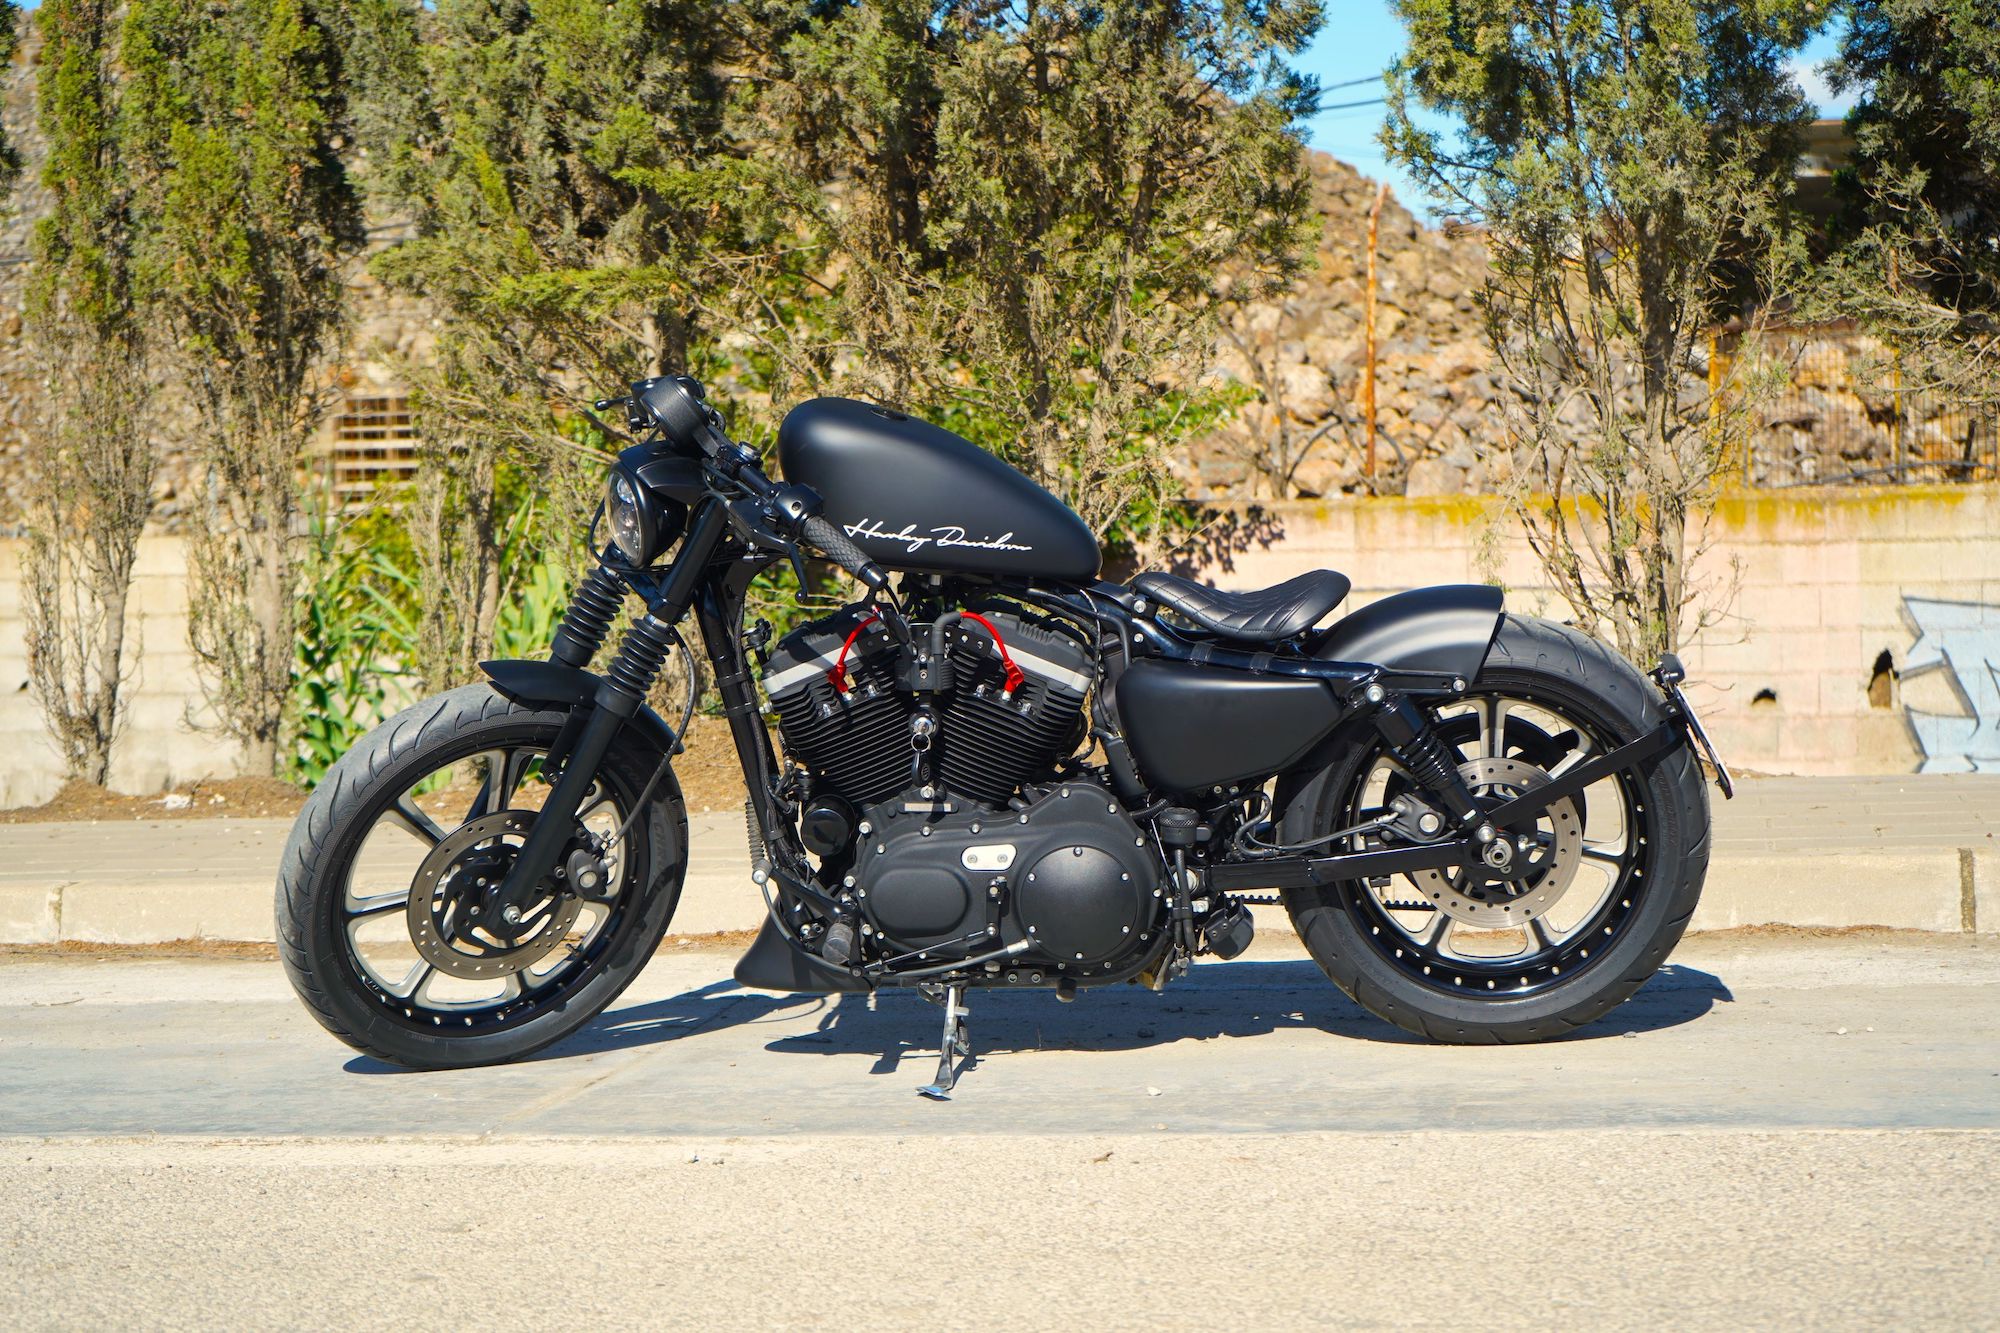 A view of the new Sportster Bobber RSD build courtesy of Francisco Alí Manén and his shop, Lord Drake Kustoms. Media provided by Francisco Alí Manén (LDK).